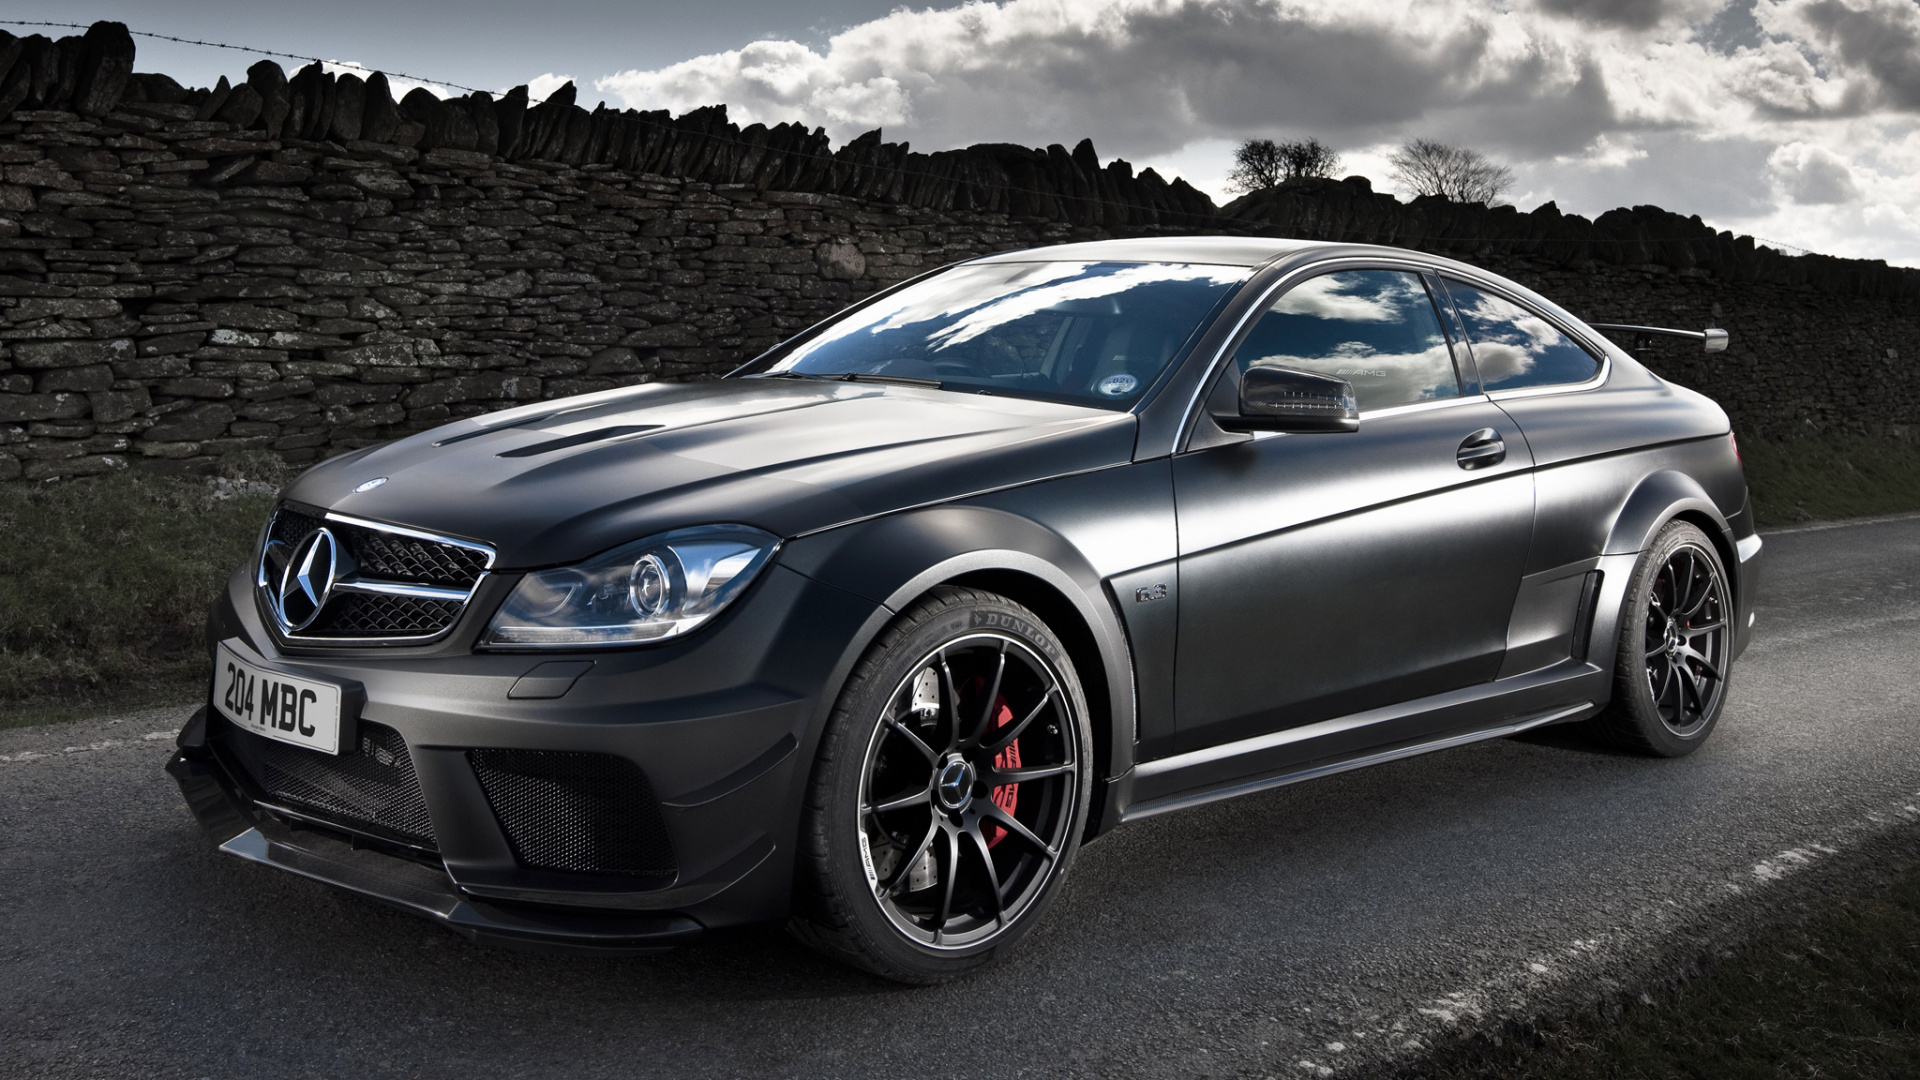 Gray Mercedes Benz Coupe on Gray Asphalt Road During Daytime. Wallpaper in 1920x1080 Resolution